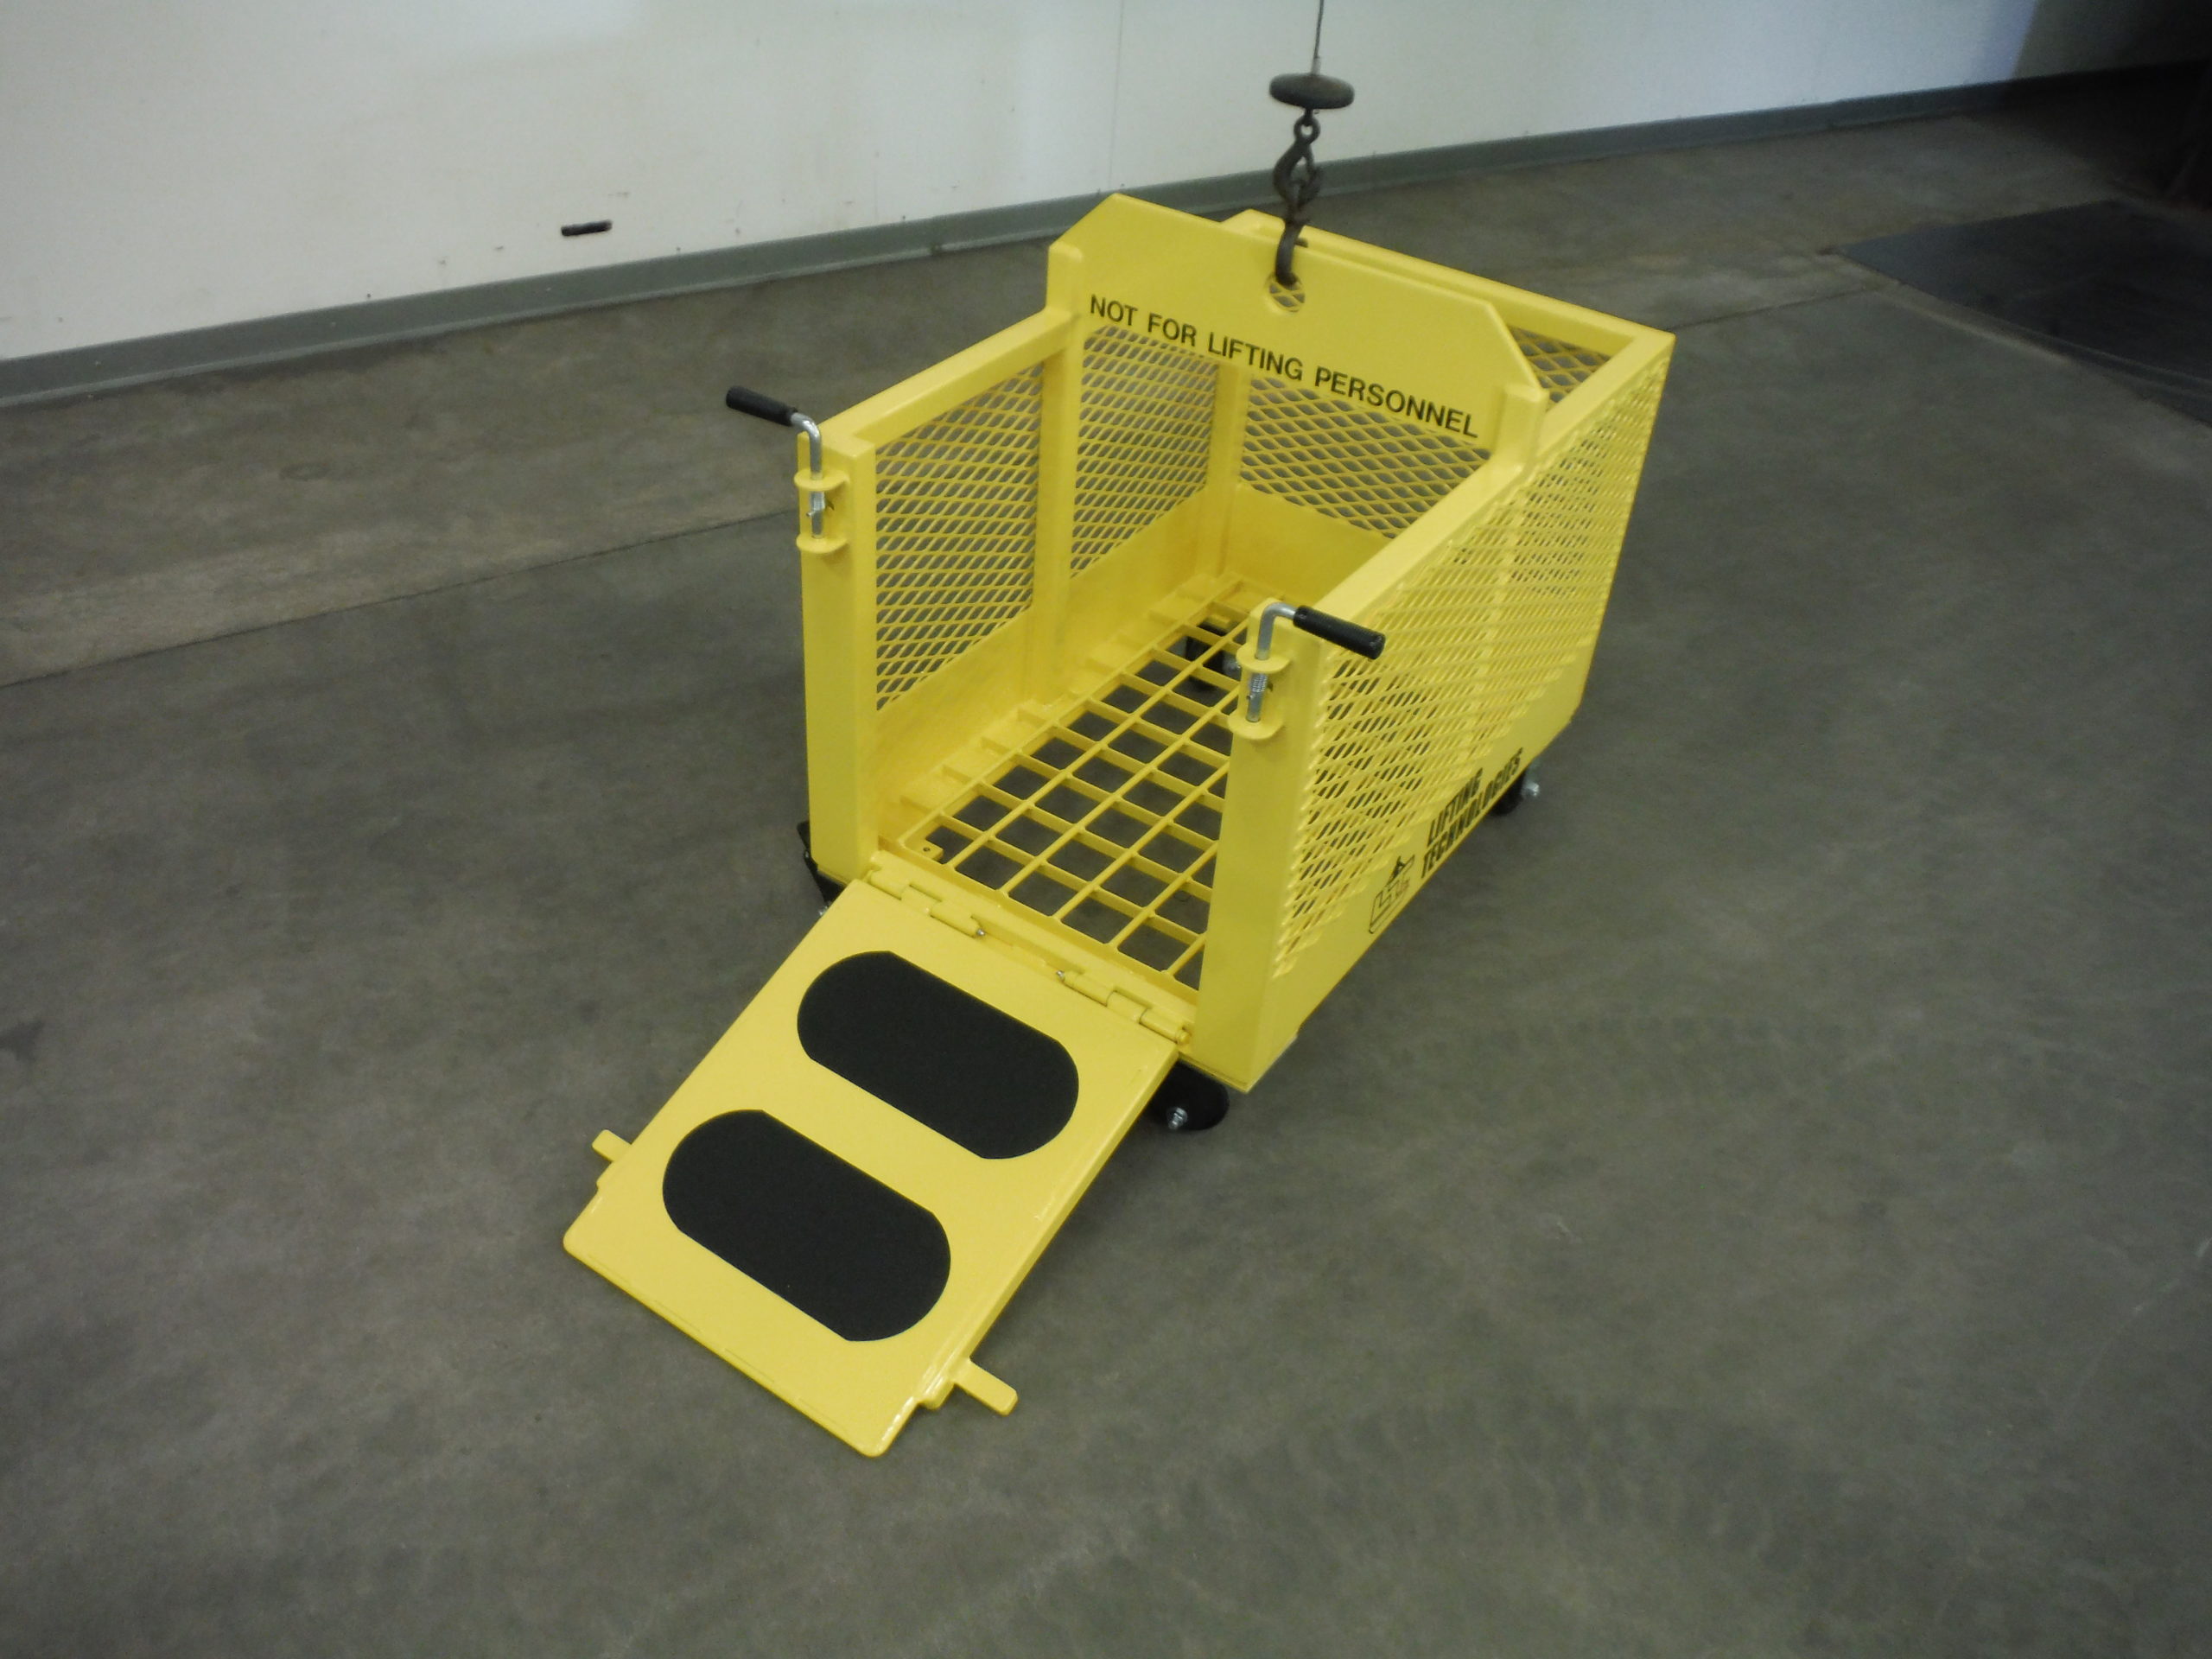 Material handling only platform, single pick with 2'' hole, ramp, and casters. Open ramp